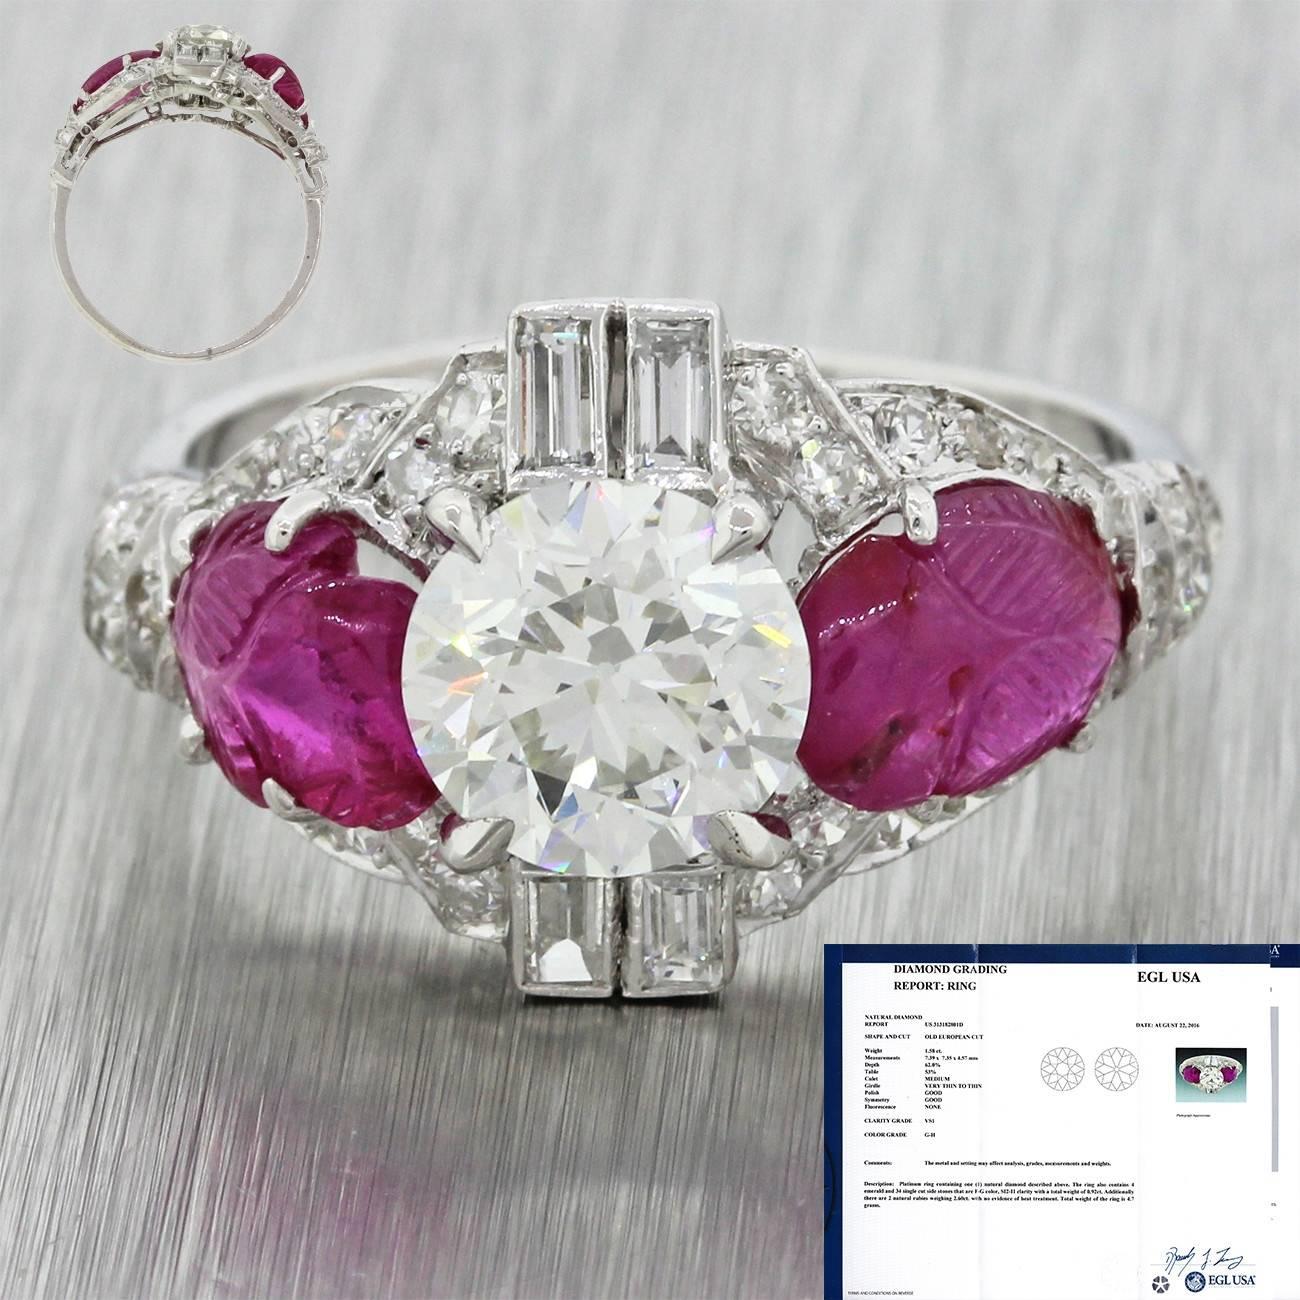 1920 Antique Art Deco 2.50 carat Diamond Rubies Platinum Engagement Ring In Excellent Condition For Sale In Huntington, NY